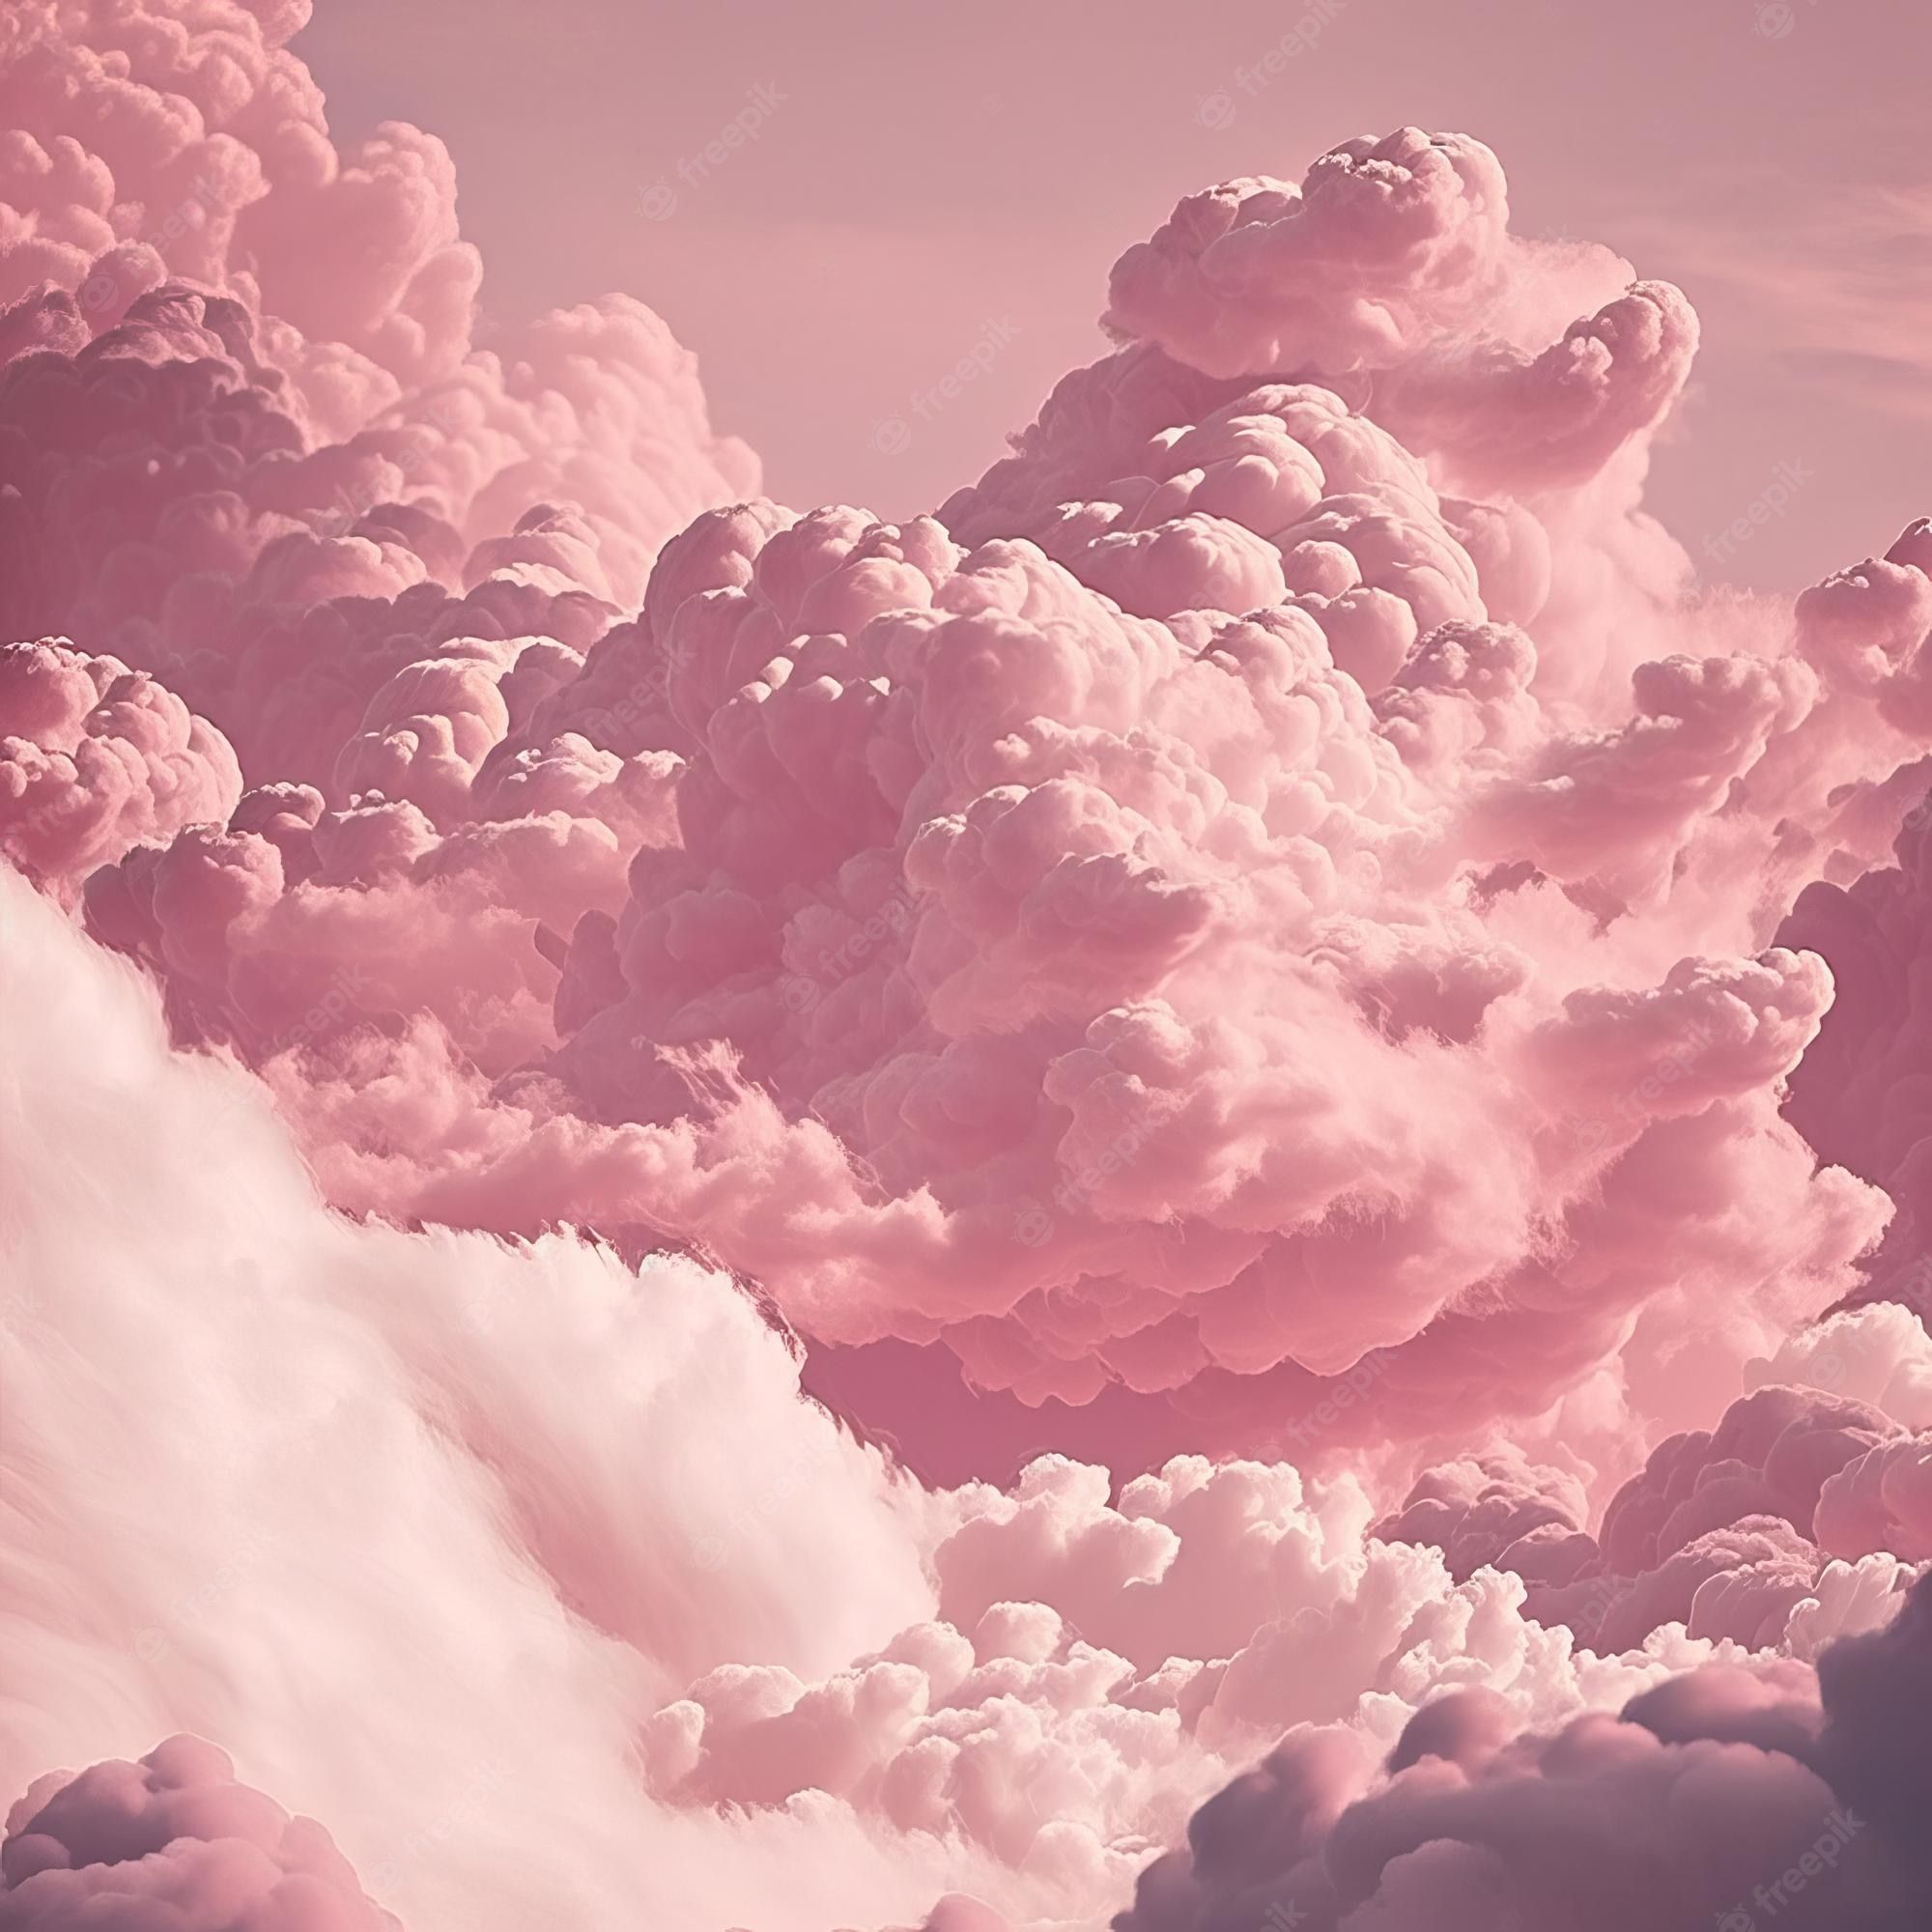 Pink Aesthetic Image